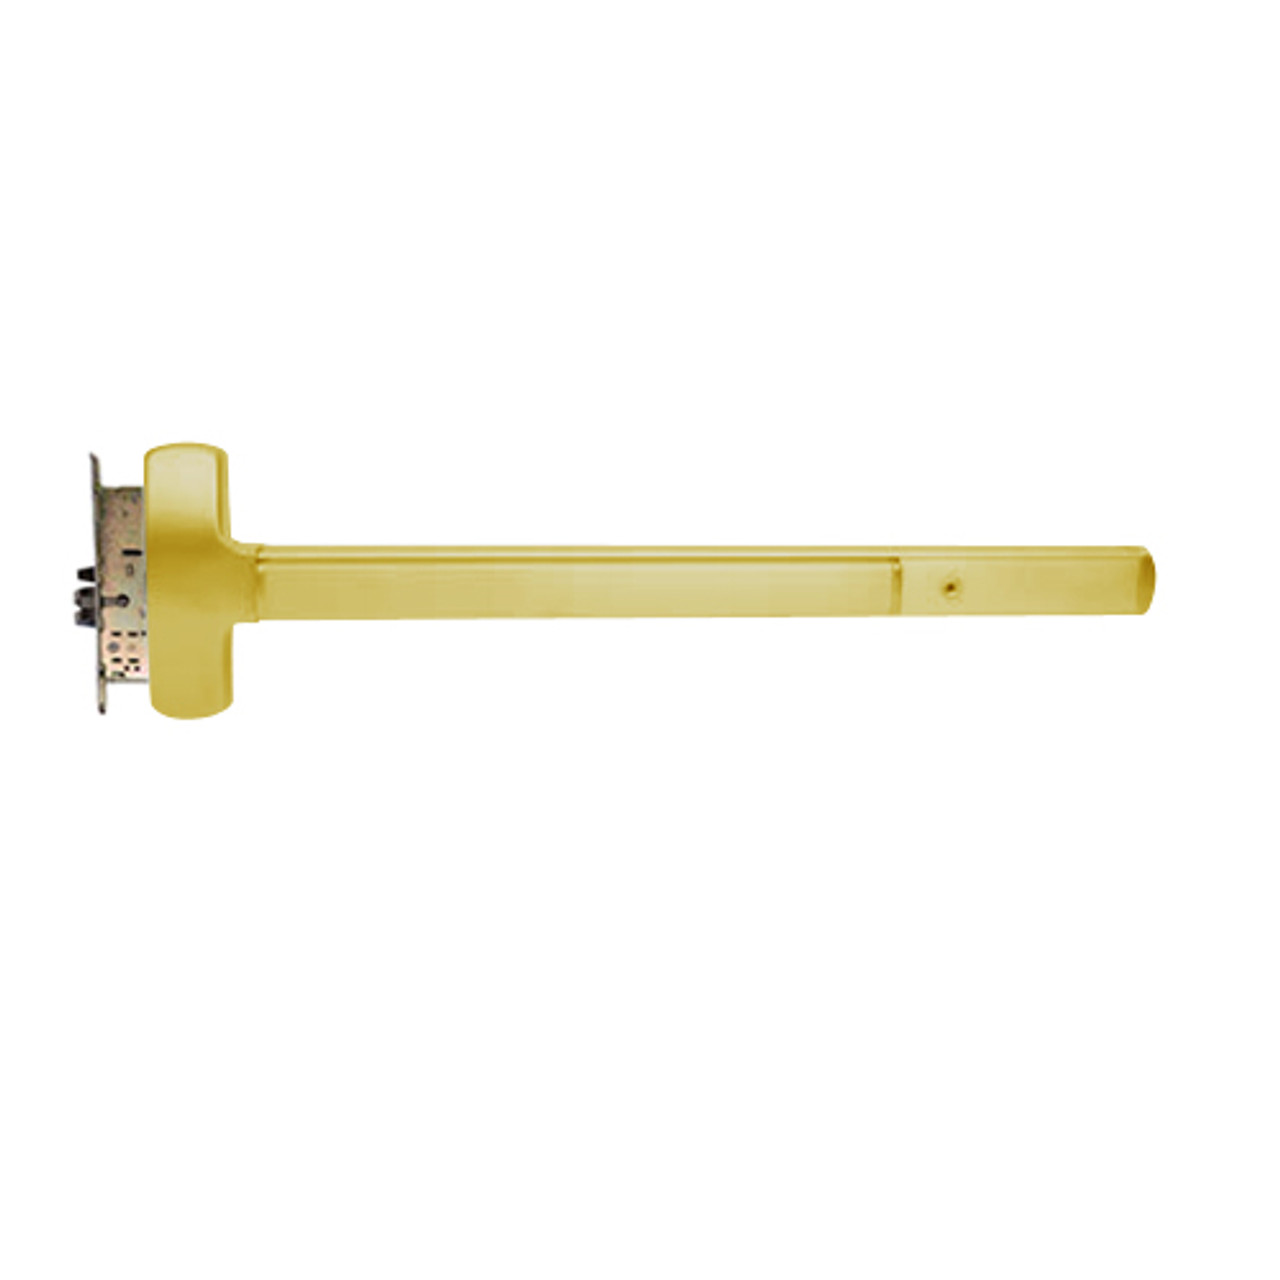 25-M-EO-US4-3-LHR Falcon Exit Device in Satin Brass